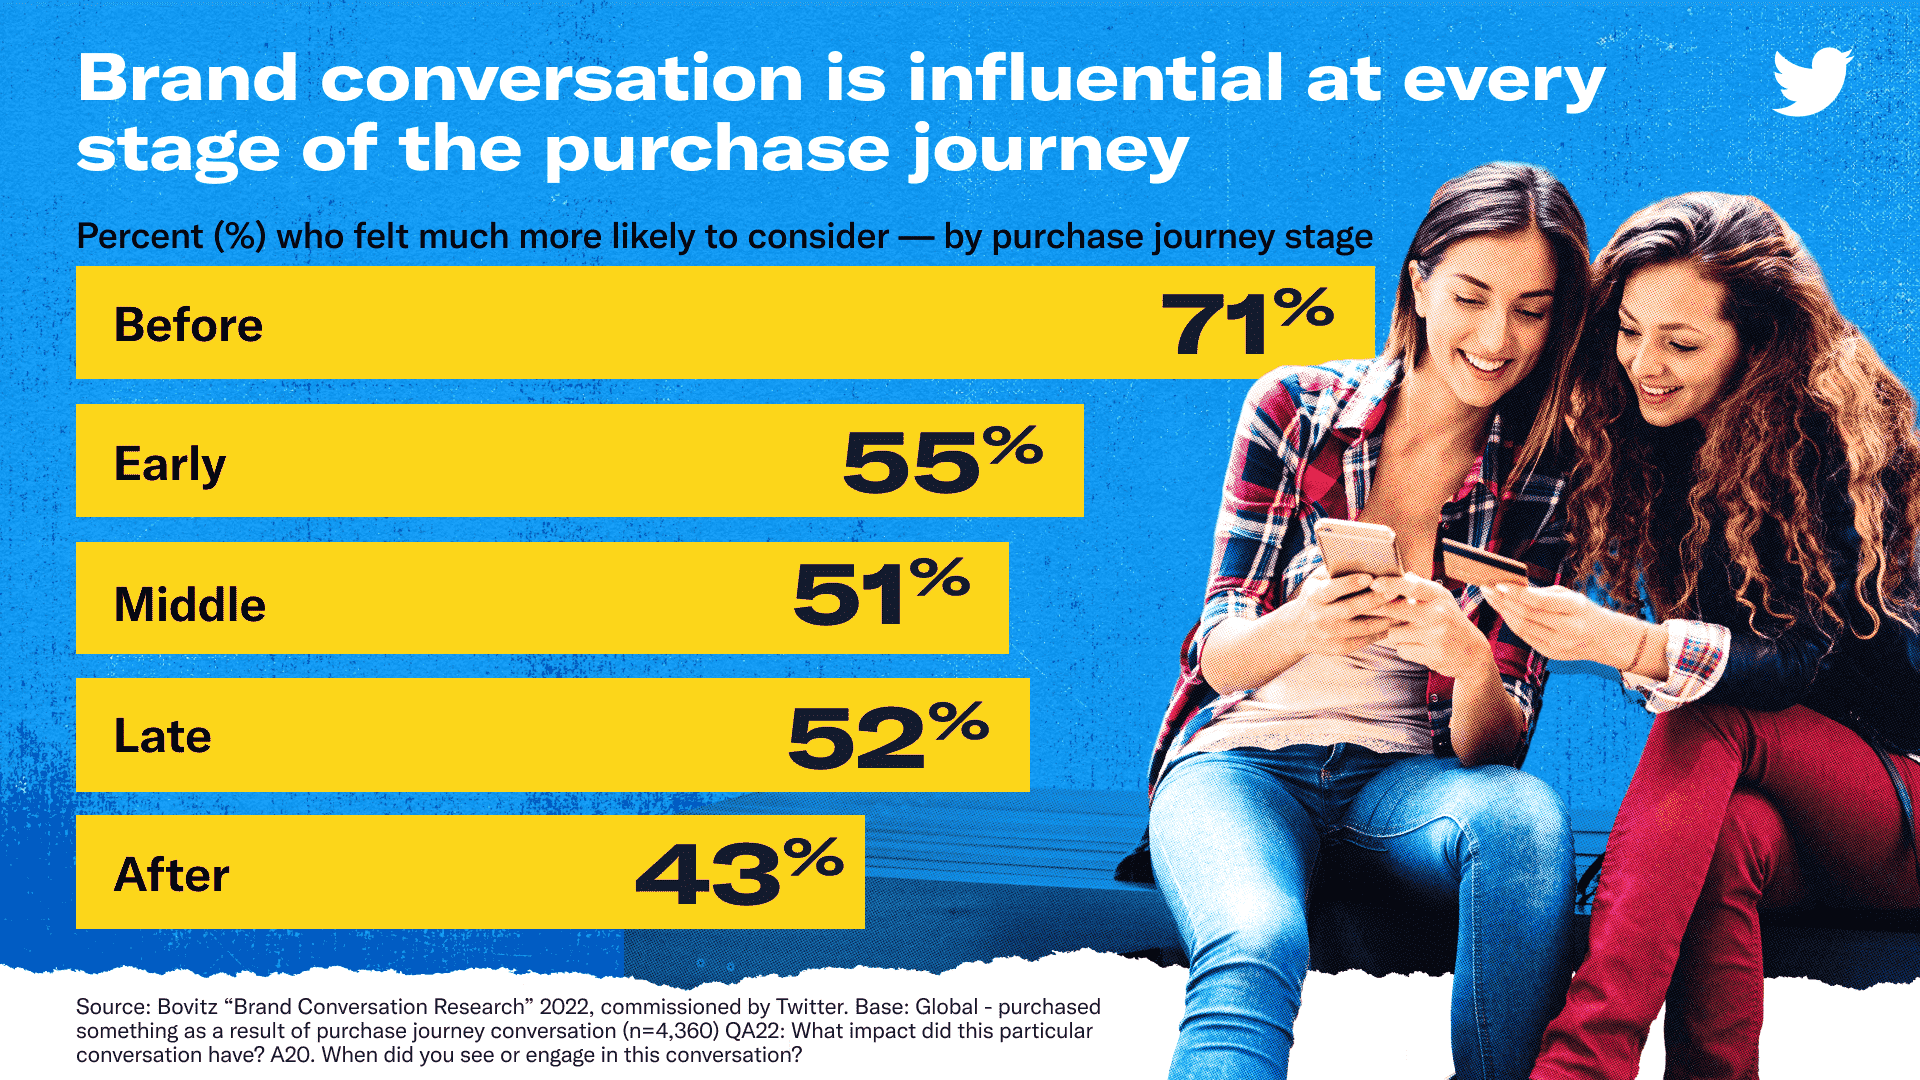 brand conversation is influential at every stage of the purchase journey